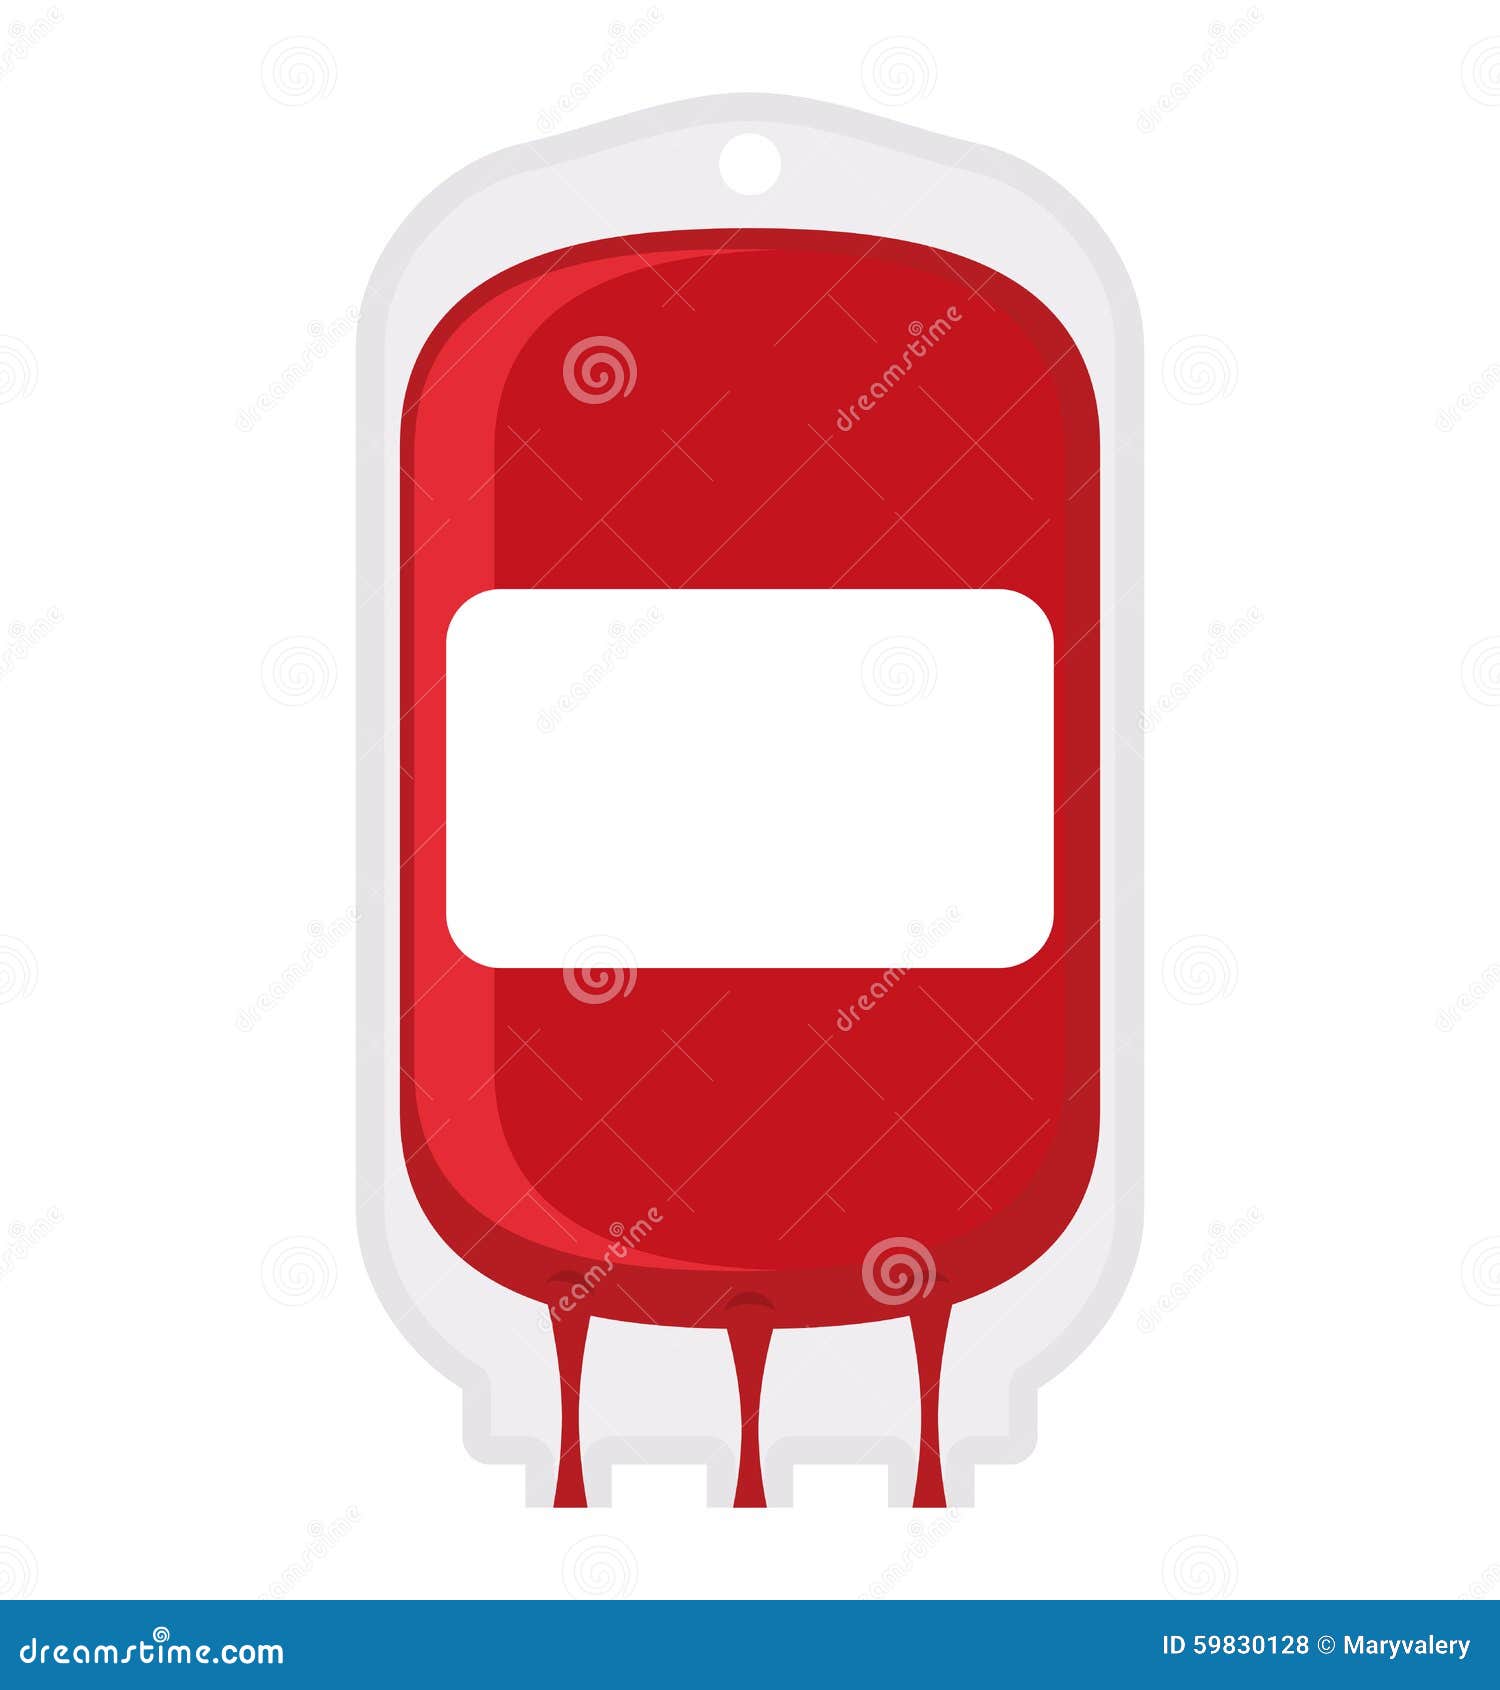 blood collection clipart - photo #6